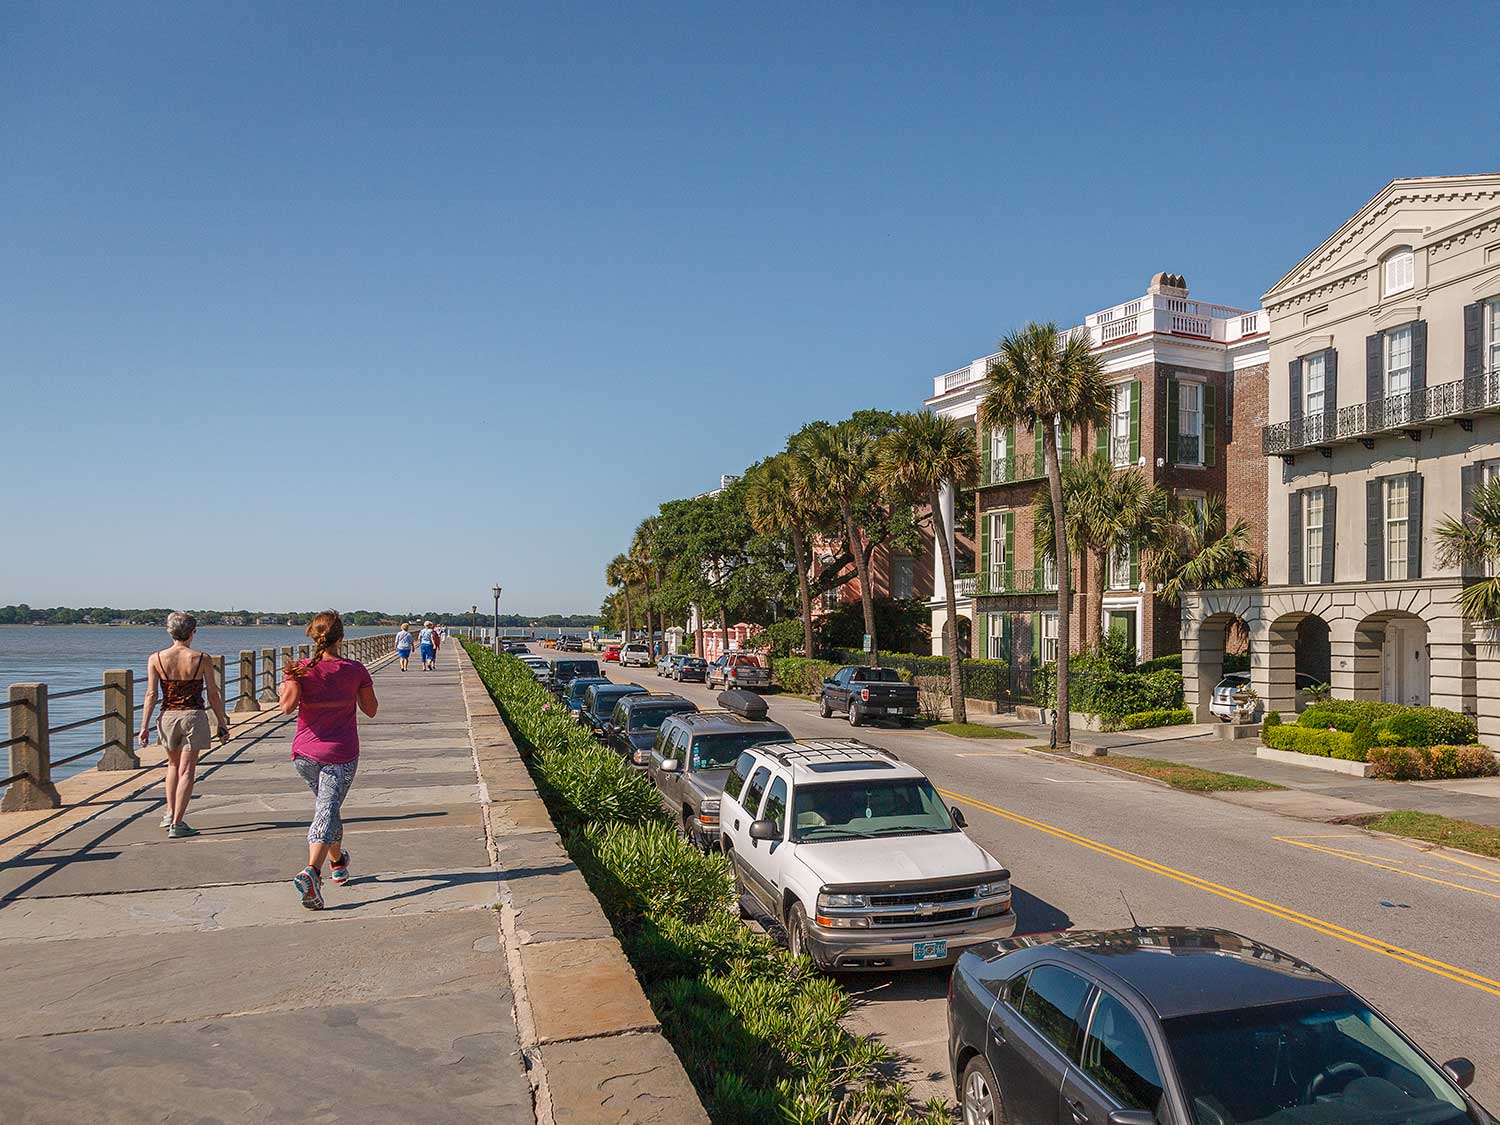 People walking on a sidewalk next to a bayside town.